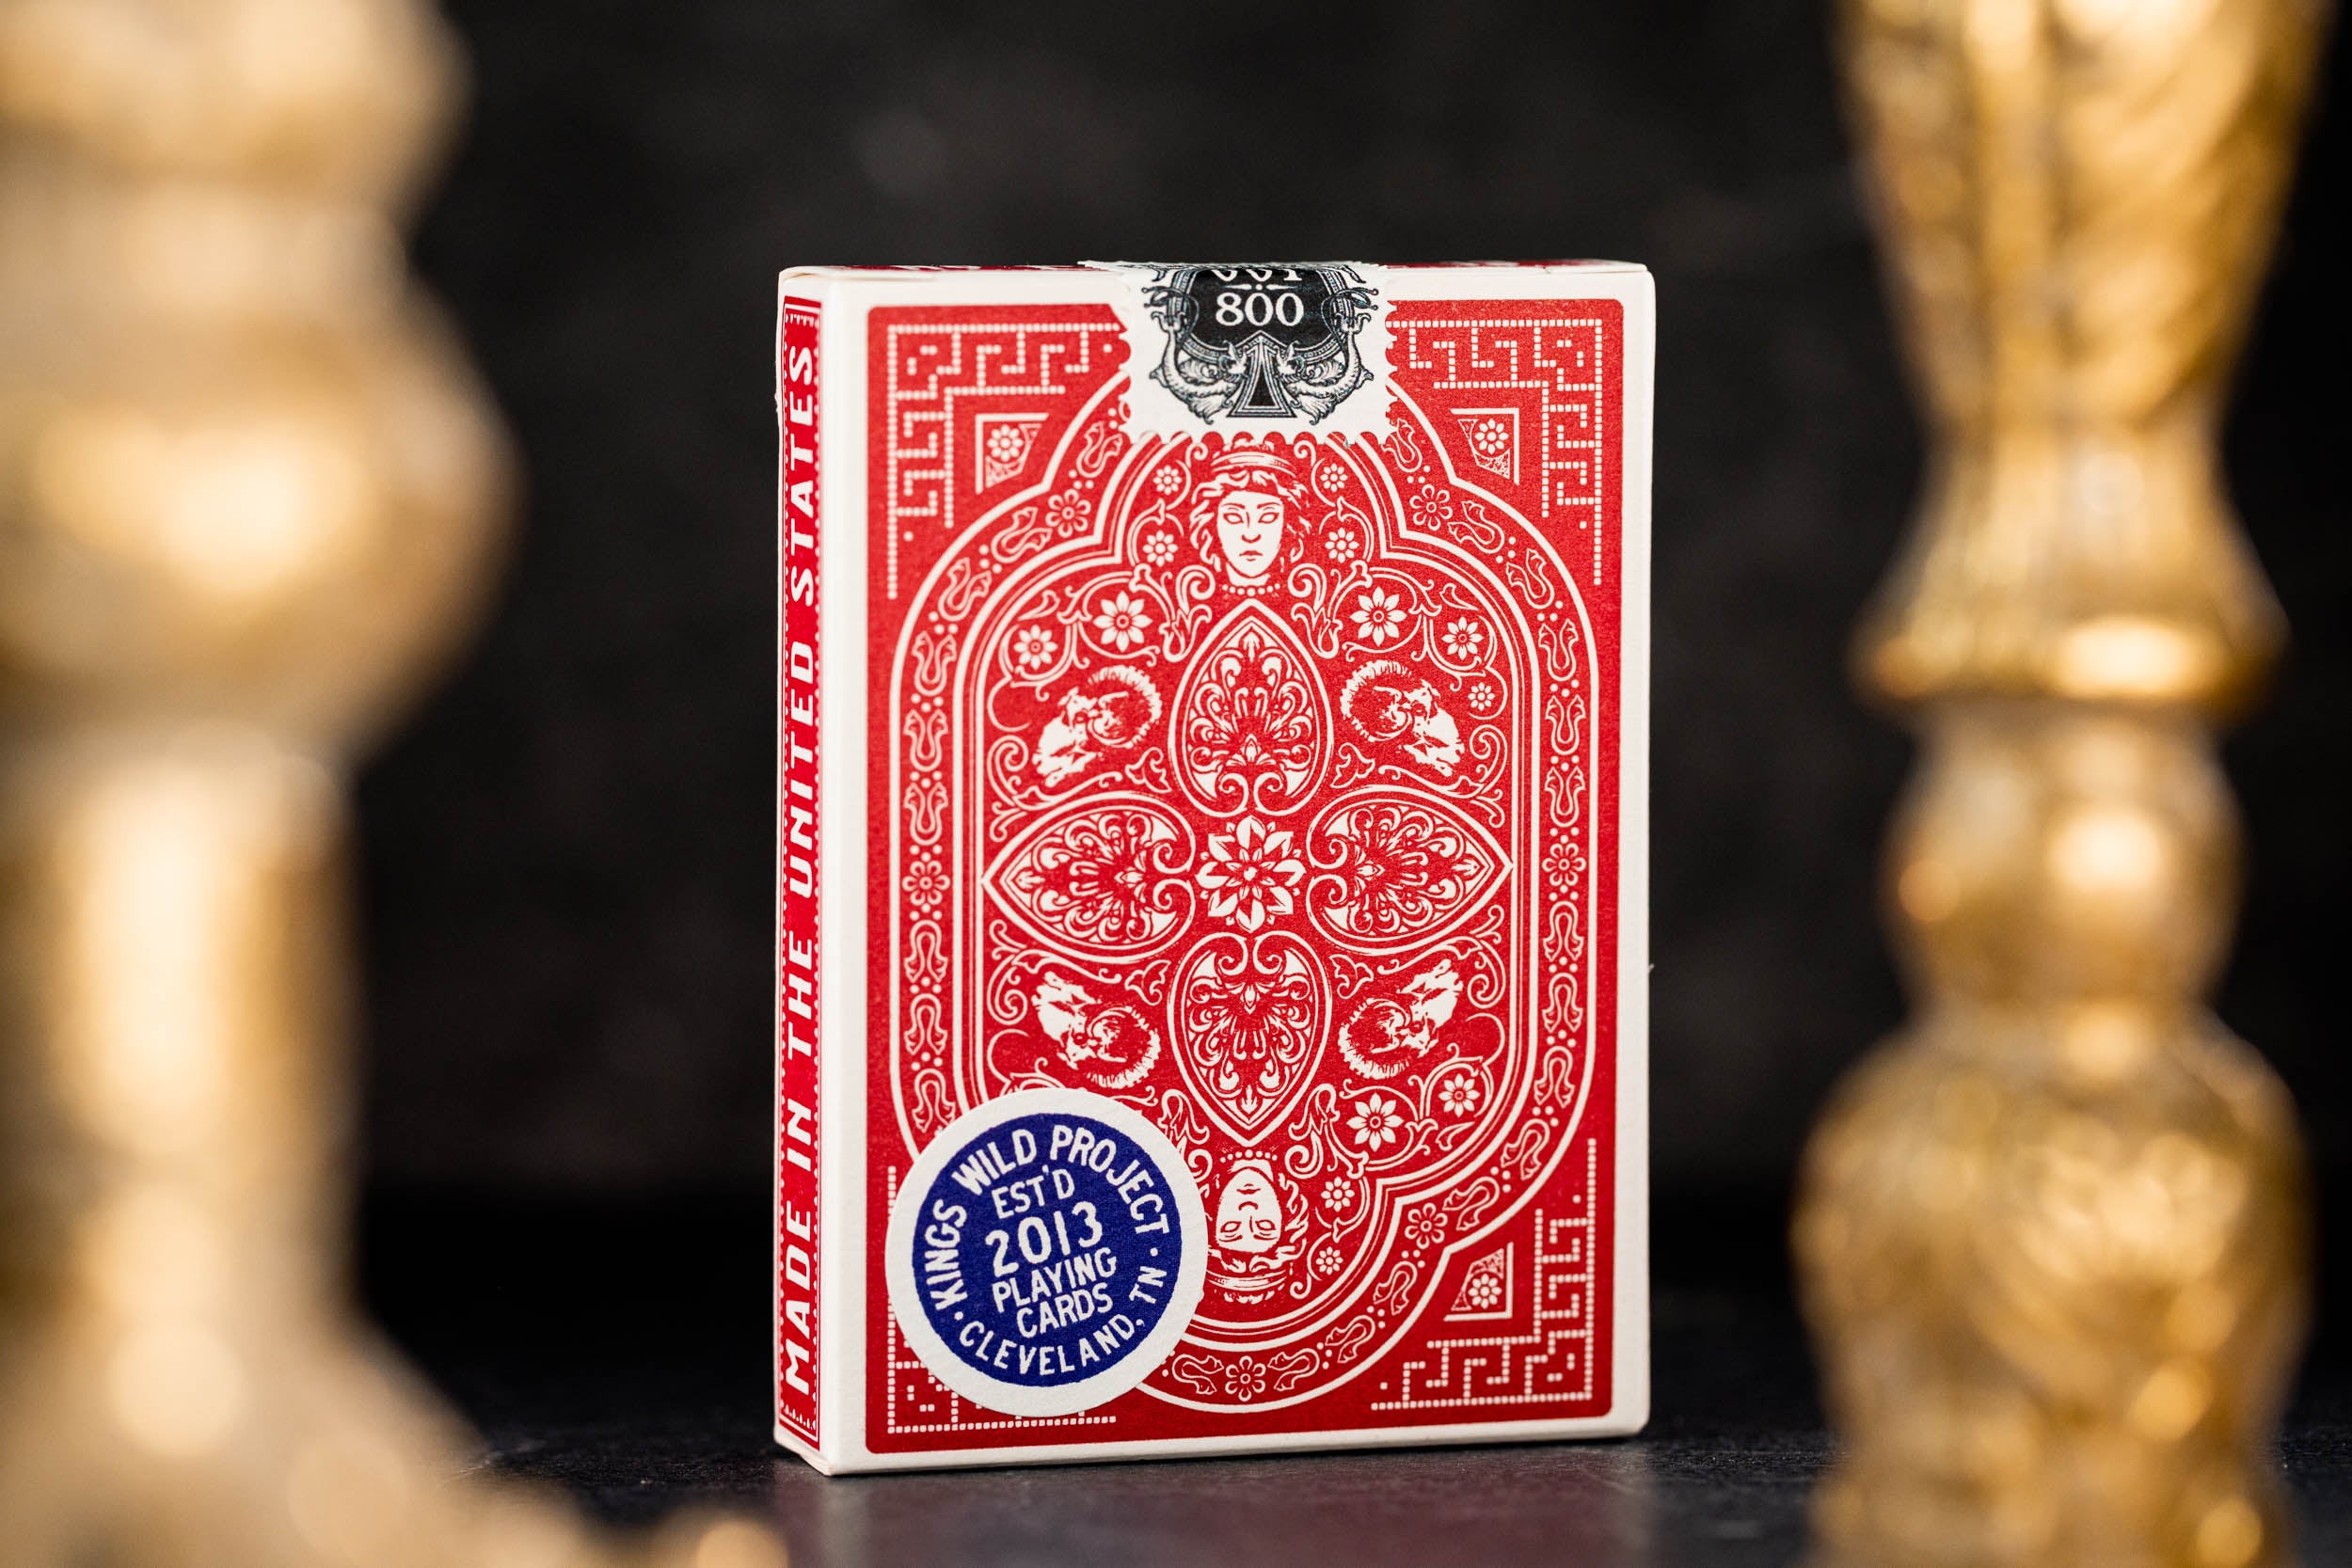 Empire Luxury Playing Cards